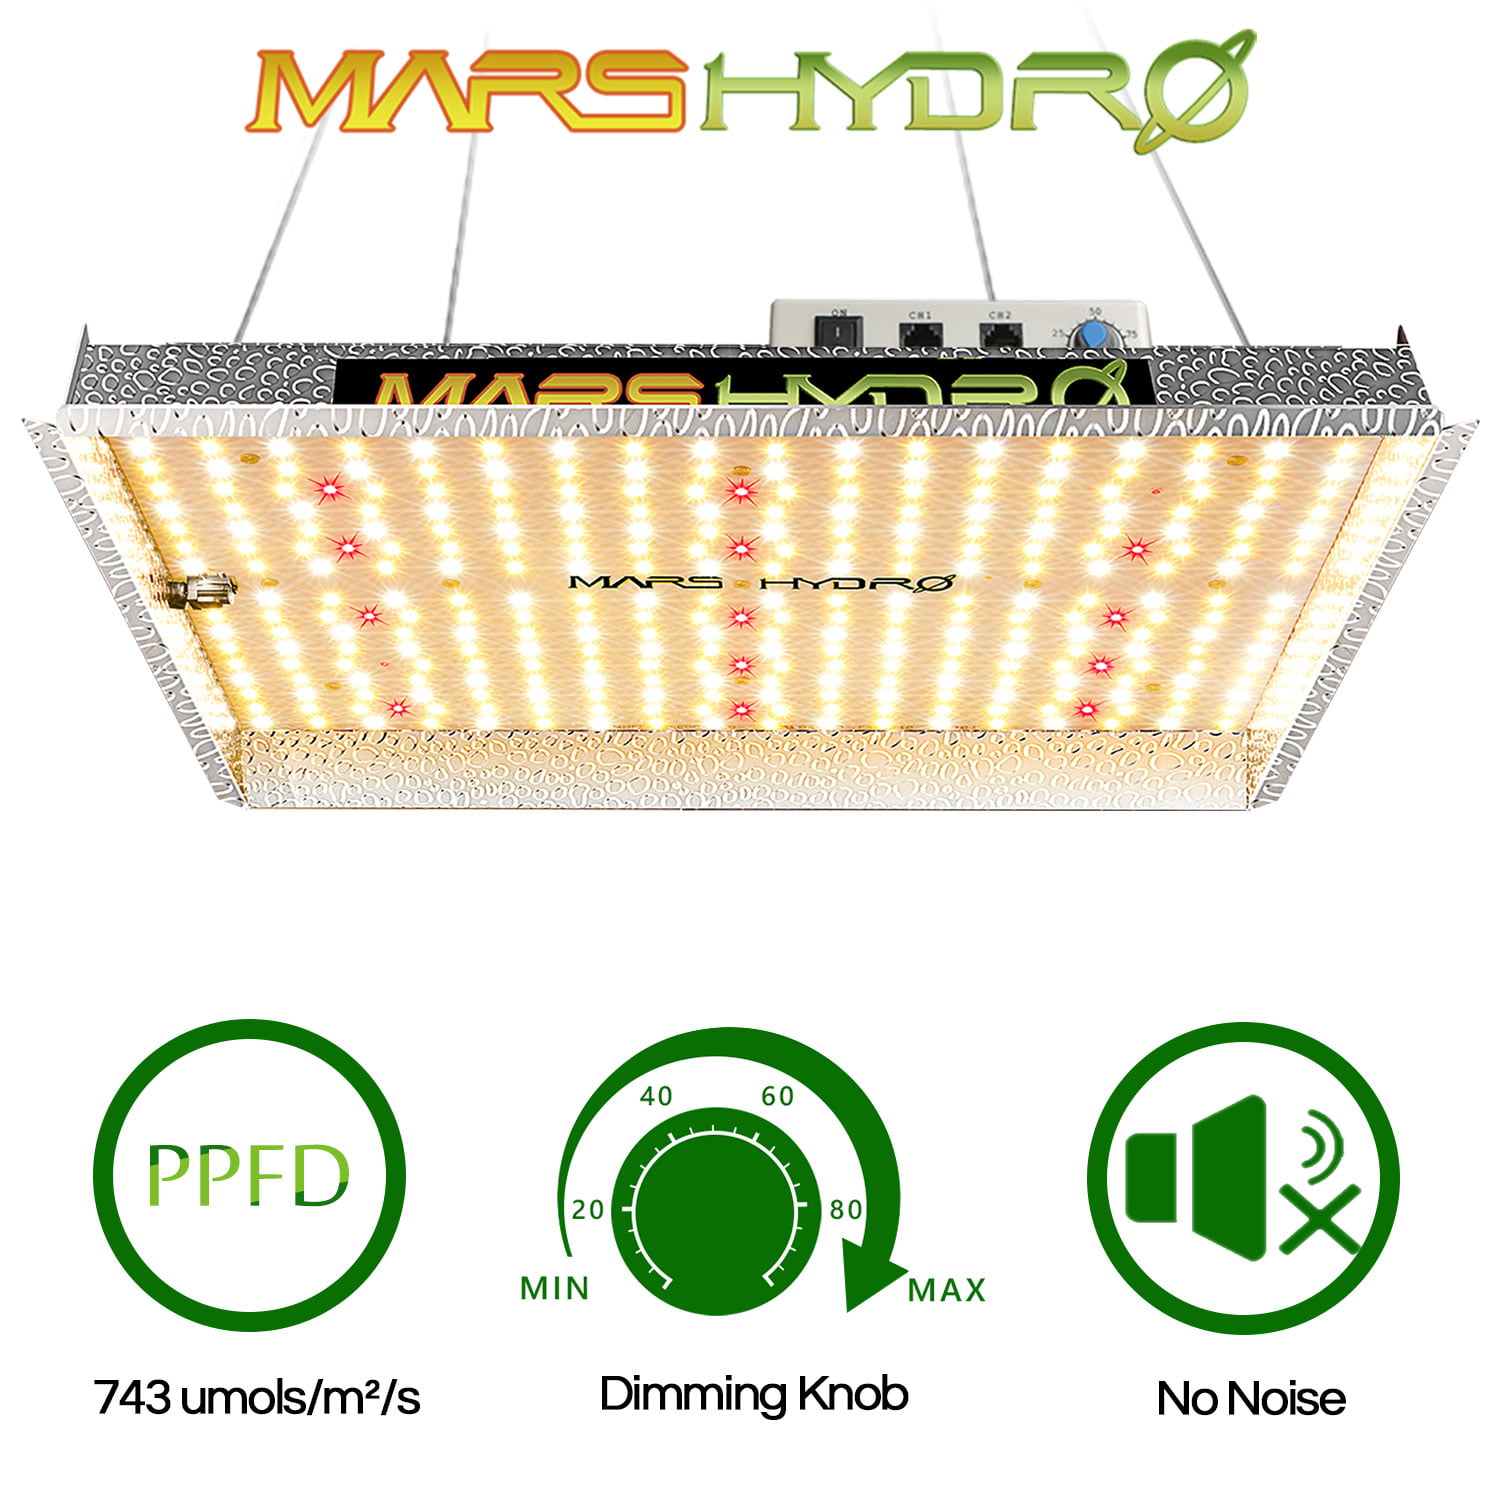 MARS HYDRO TS 1000W Led Grow Light 3x3ft Daisy Chain Dimmable Full Spectrum LED Growing Lights for Indoor Plants Greenhouse Veg Bloom Light with 342 LEDs Hydroponic Growing Lamps Actual Power 150Watt 